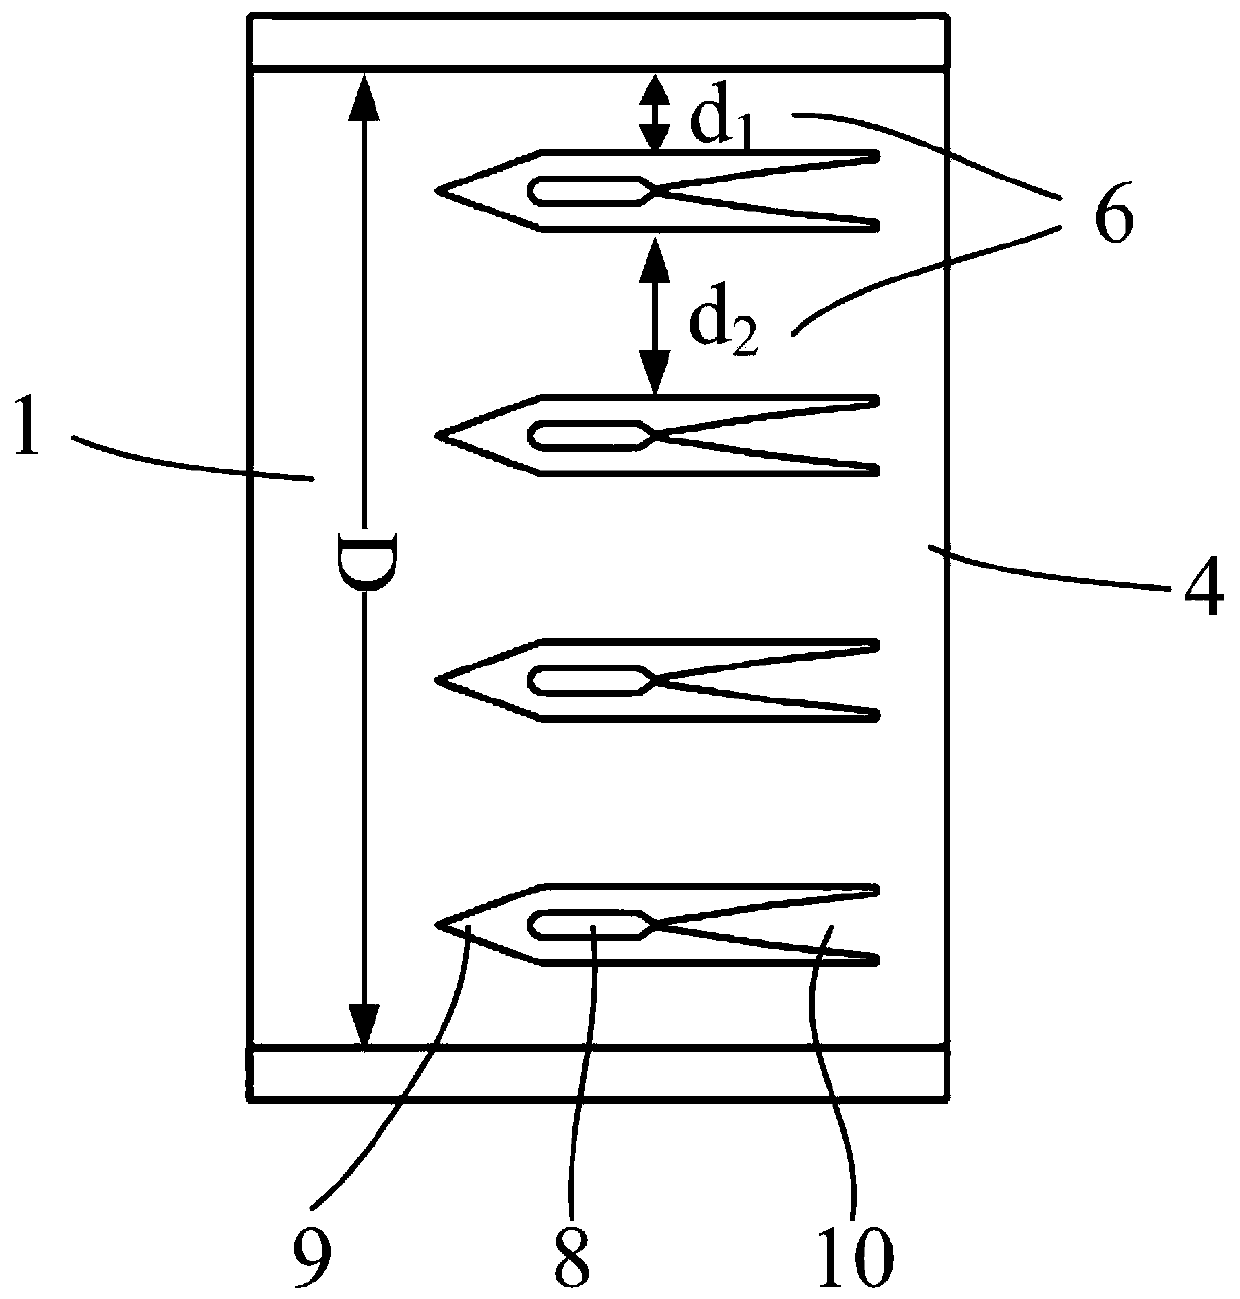 Structural design of a two-dimensional multi-plate ejector